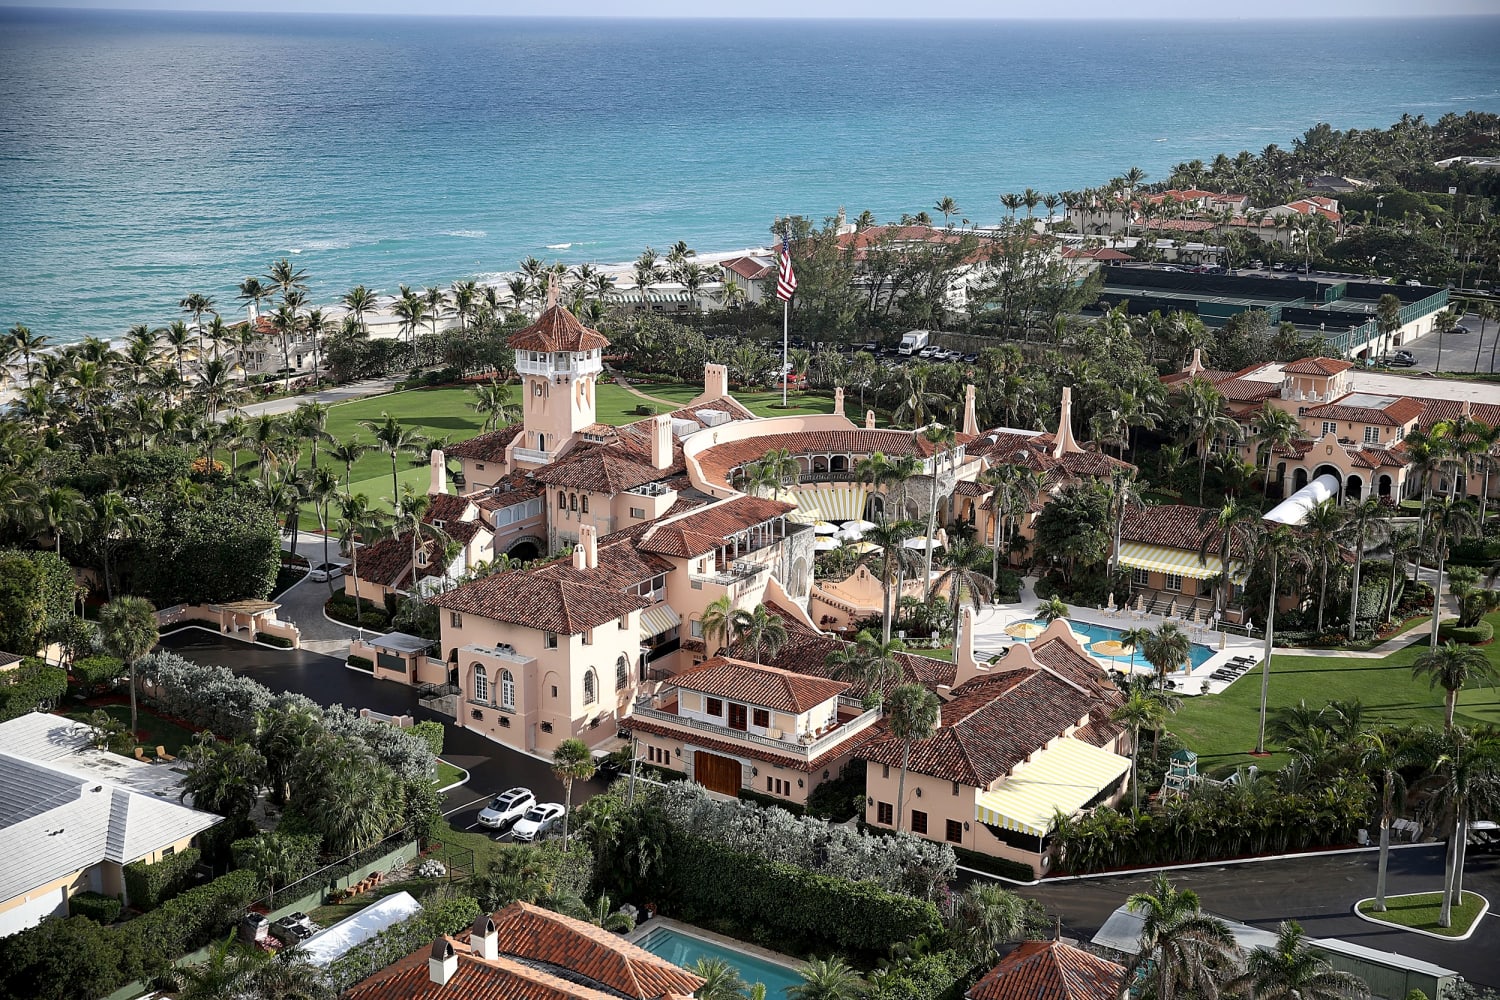 In the Mar-a-Lago case, the DOJ appeal (and Trump’s reaction) matters